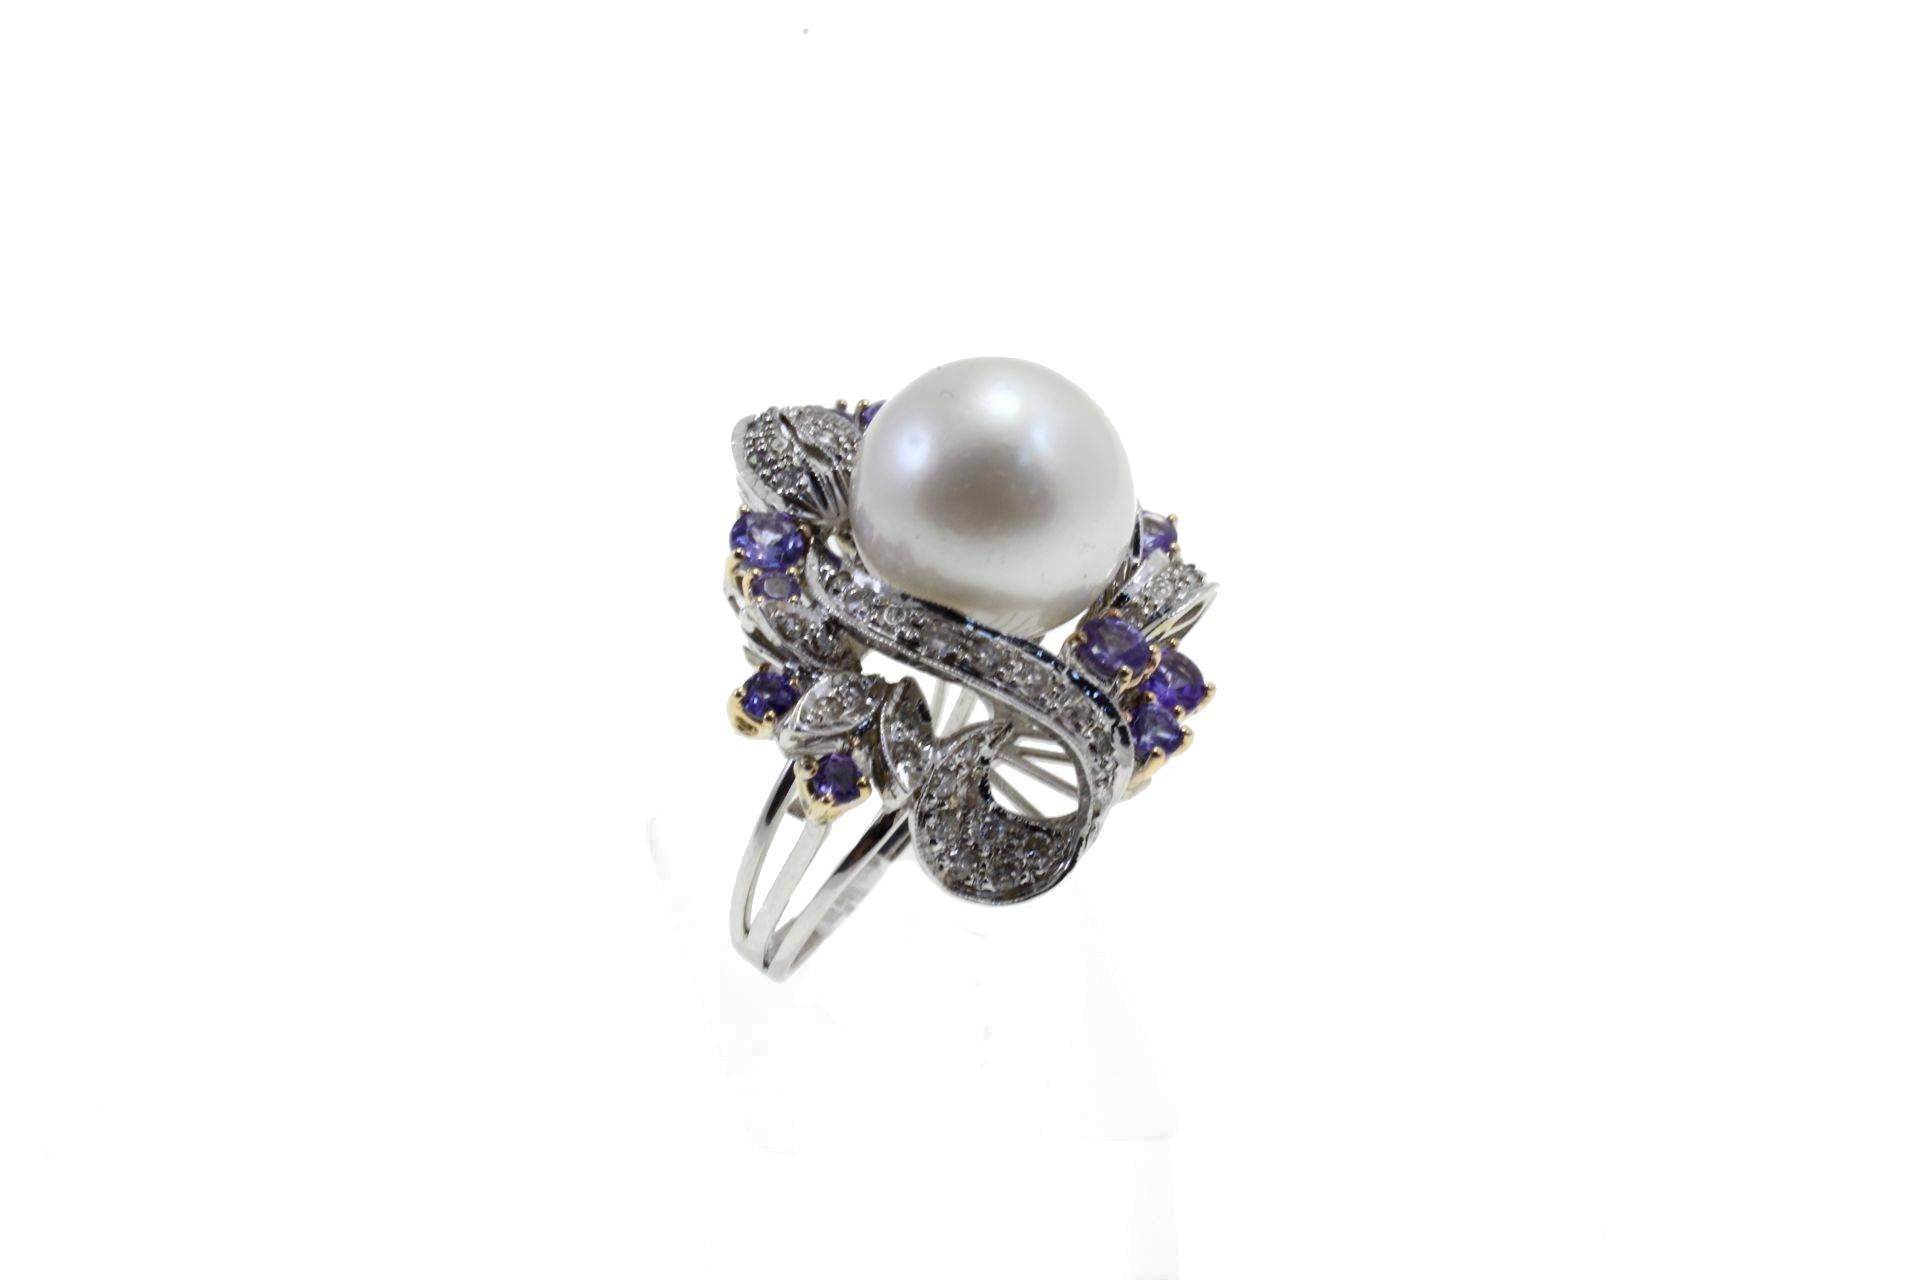 SHIPPING POLICY:
No additional costs will be added to this order.
Shipping costs will be totally covered by the seller (customs duties included).

Cocktail ring realized in 14k rose and white gold mounted with 4 g of central white pearl (4 mm),